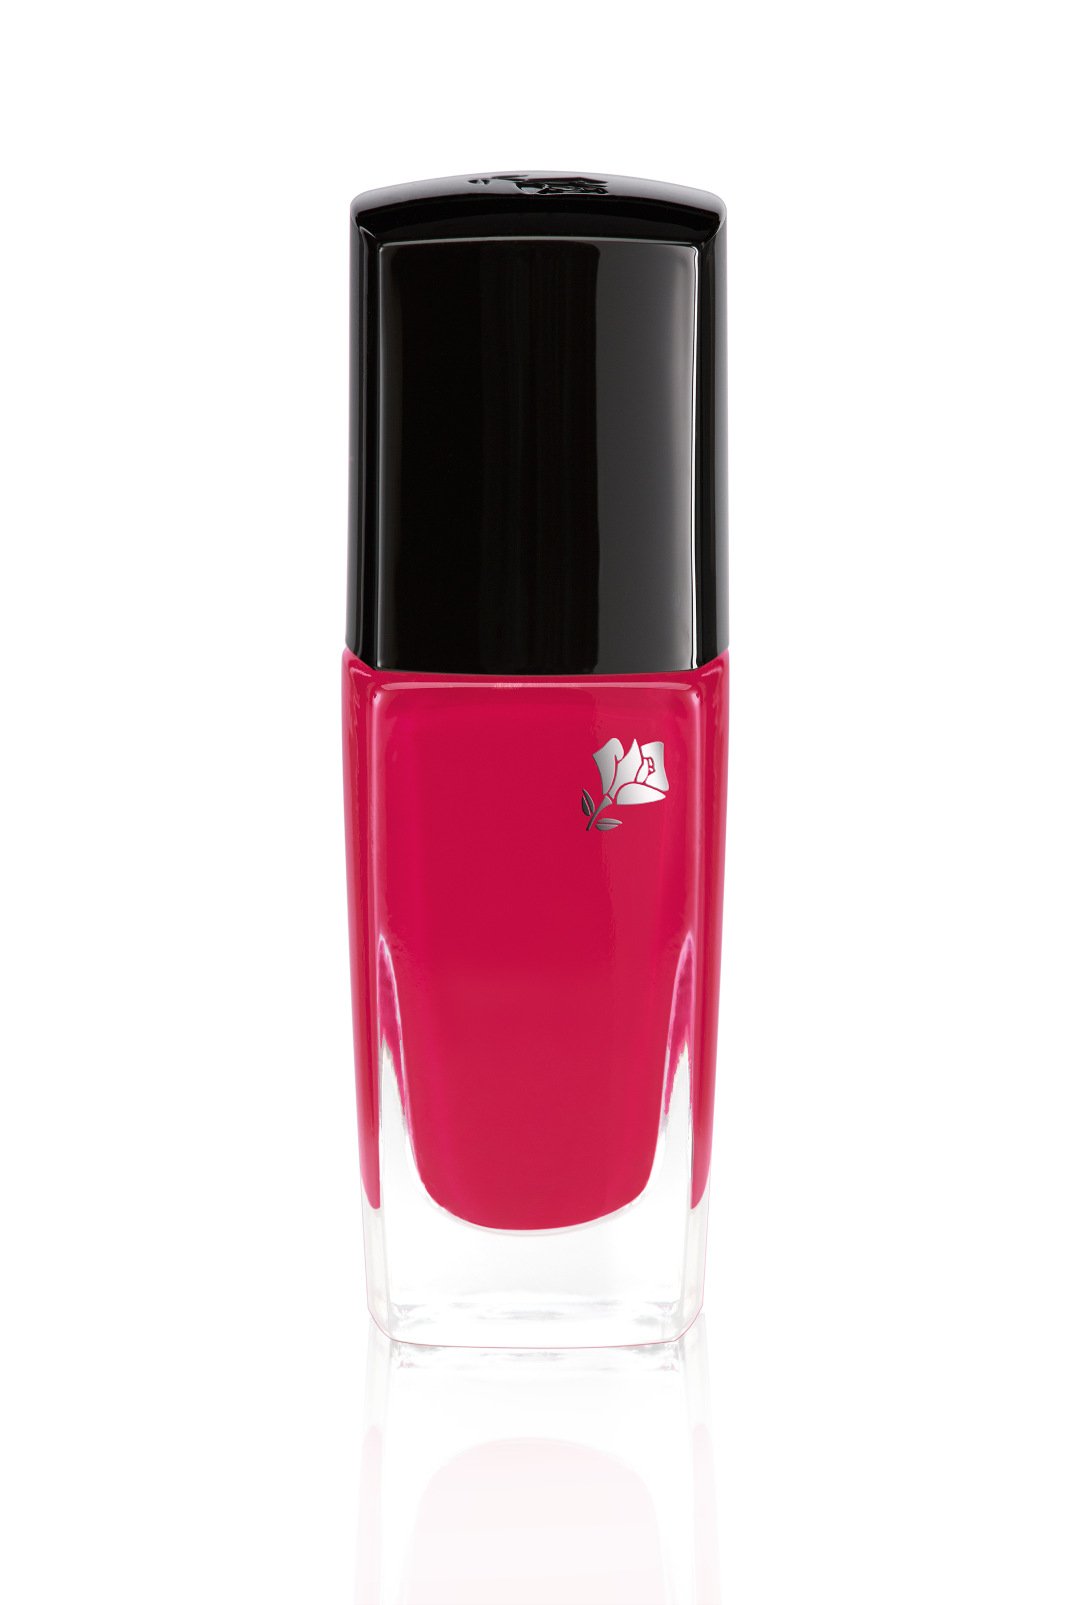 Vernis in Love, 522 Summer, Lancome